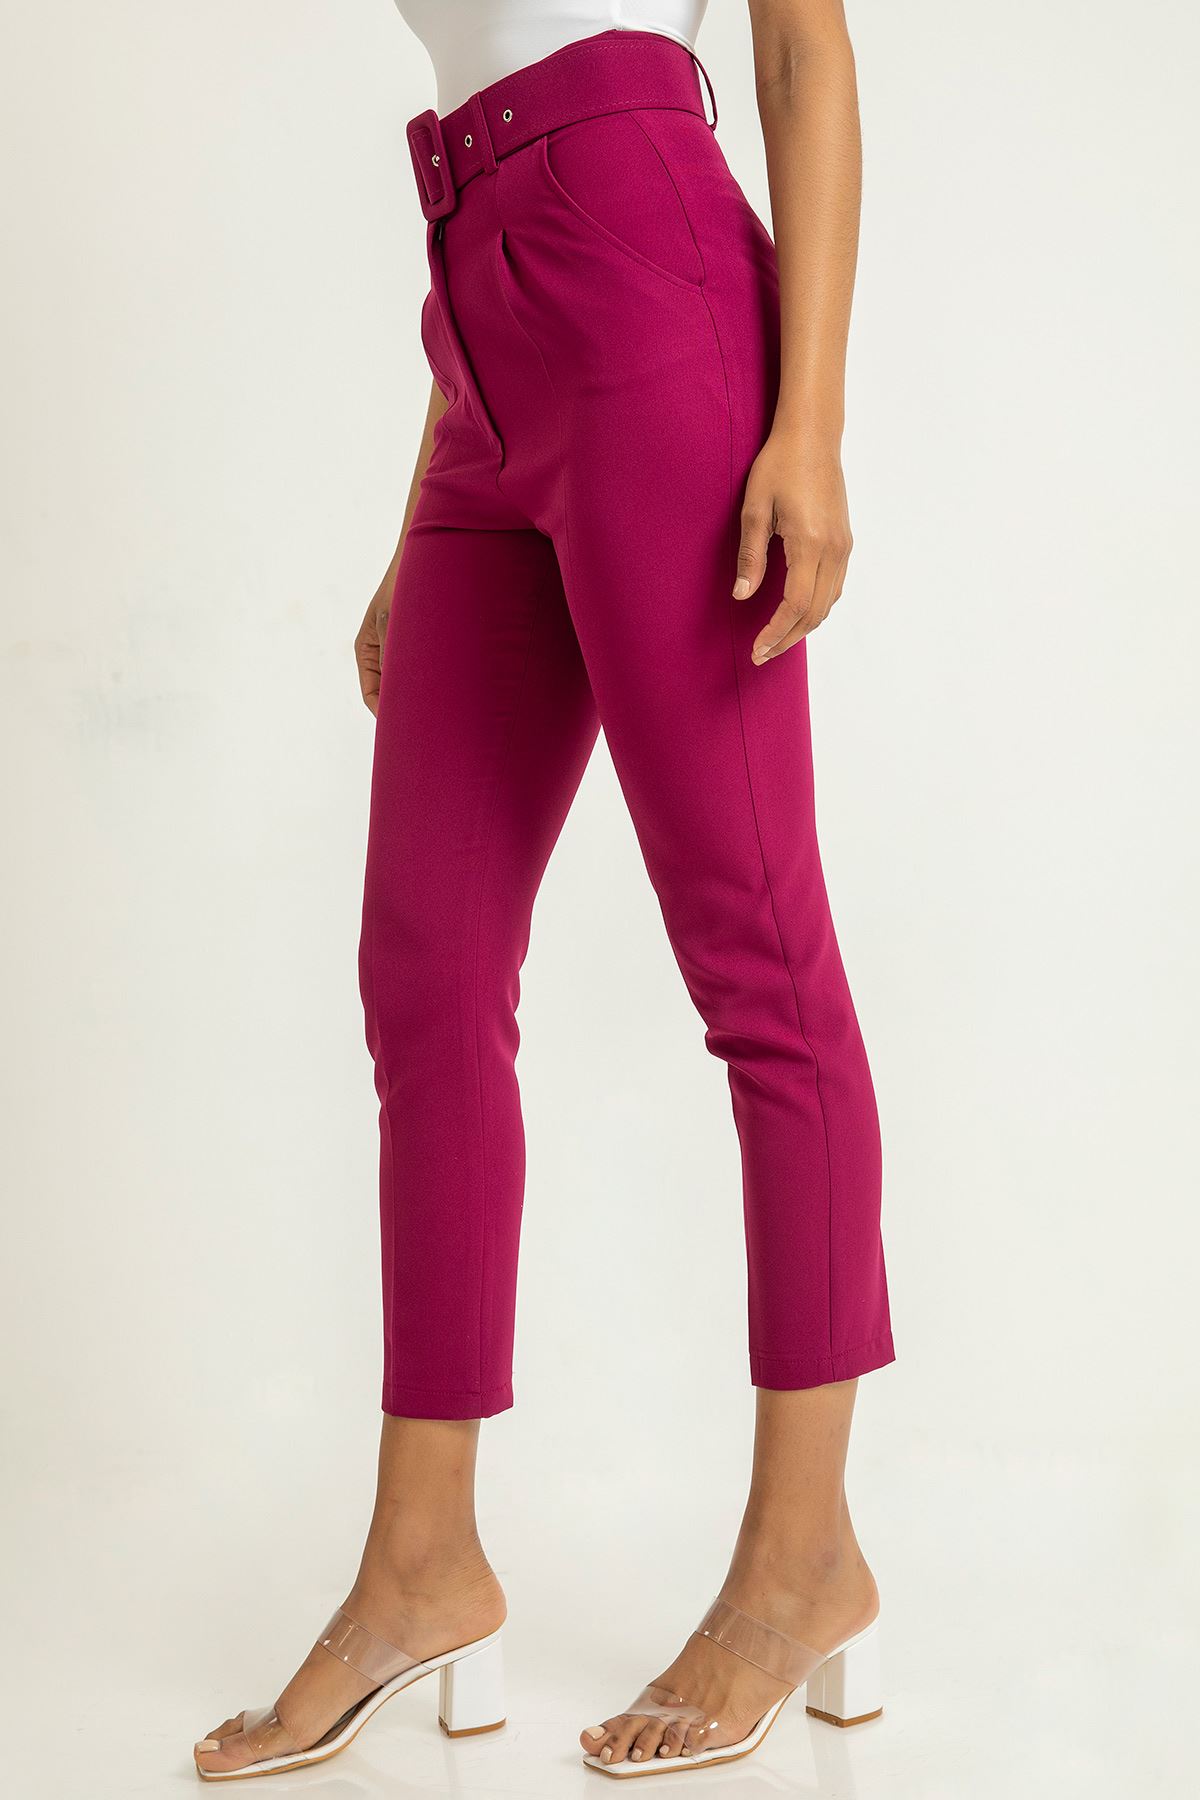 Atlas Fabric Ankle Length Tight Fit Women'S Trouser With Belt - Plum